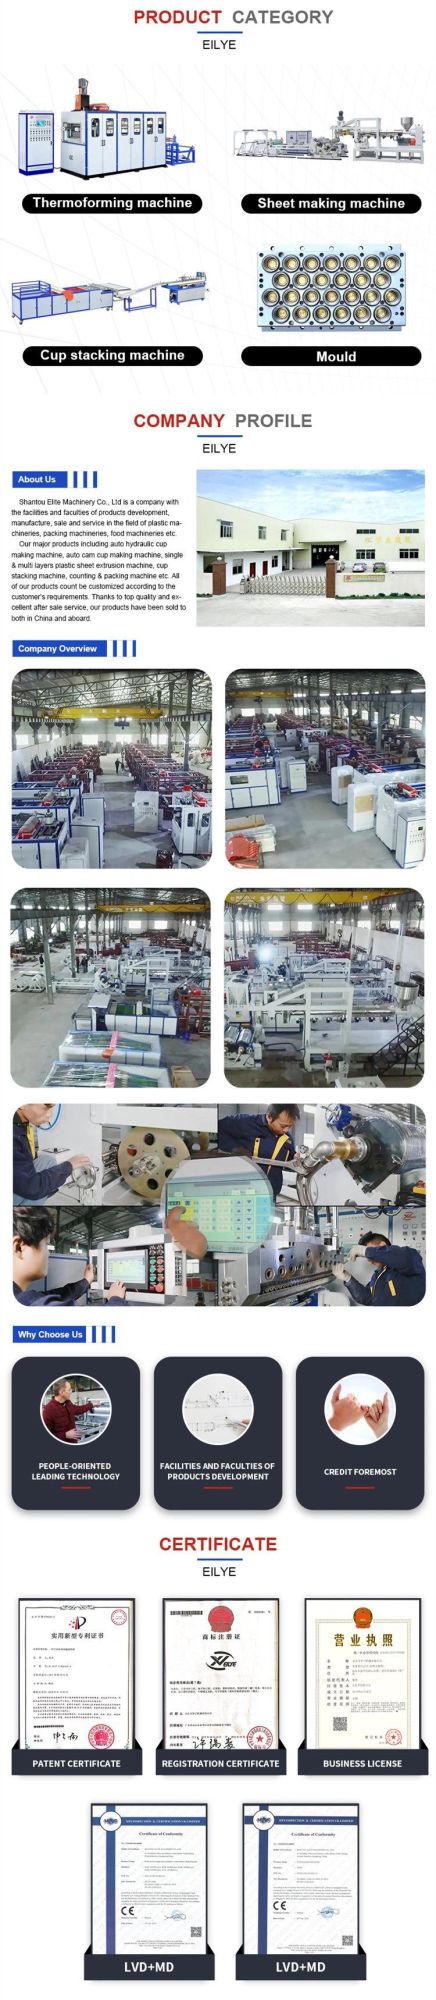 Hot Selling PVC Sheet Making Machine/Extrusion Line for Blister Packaging